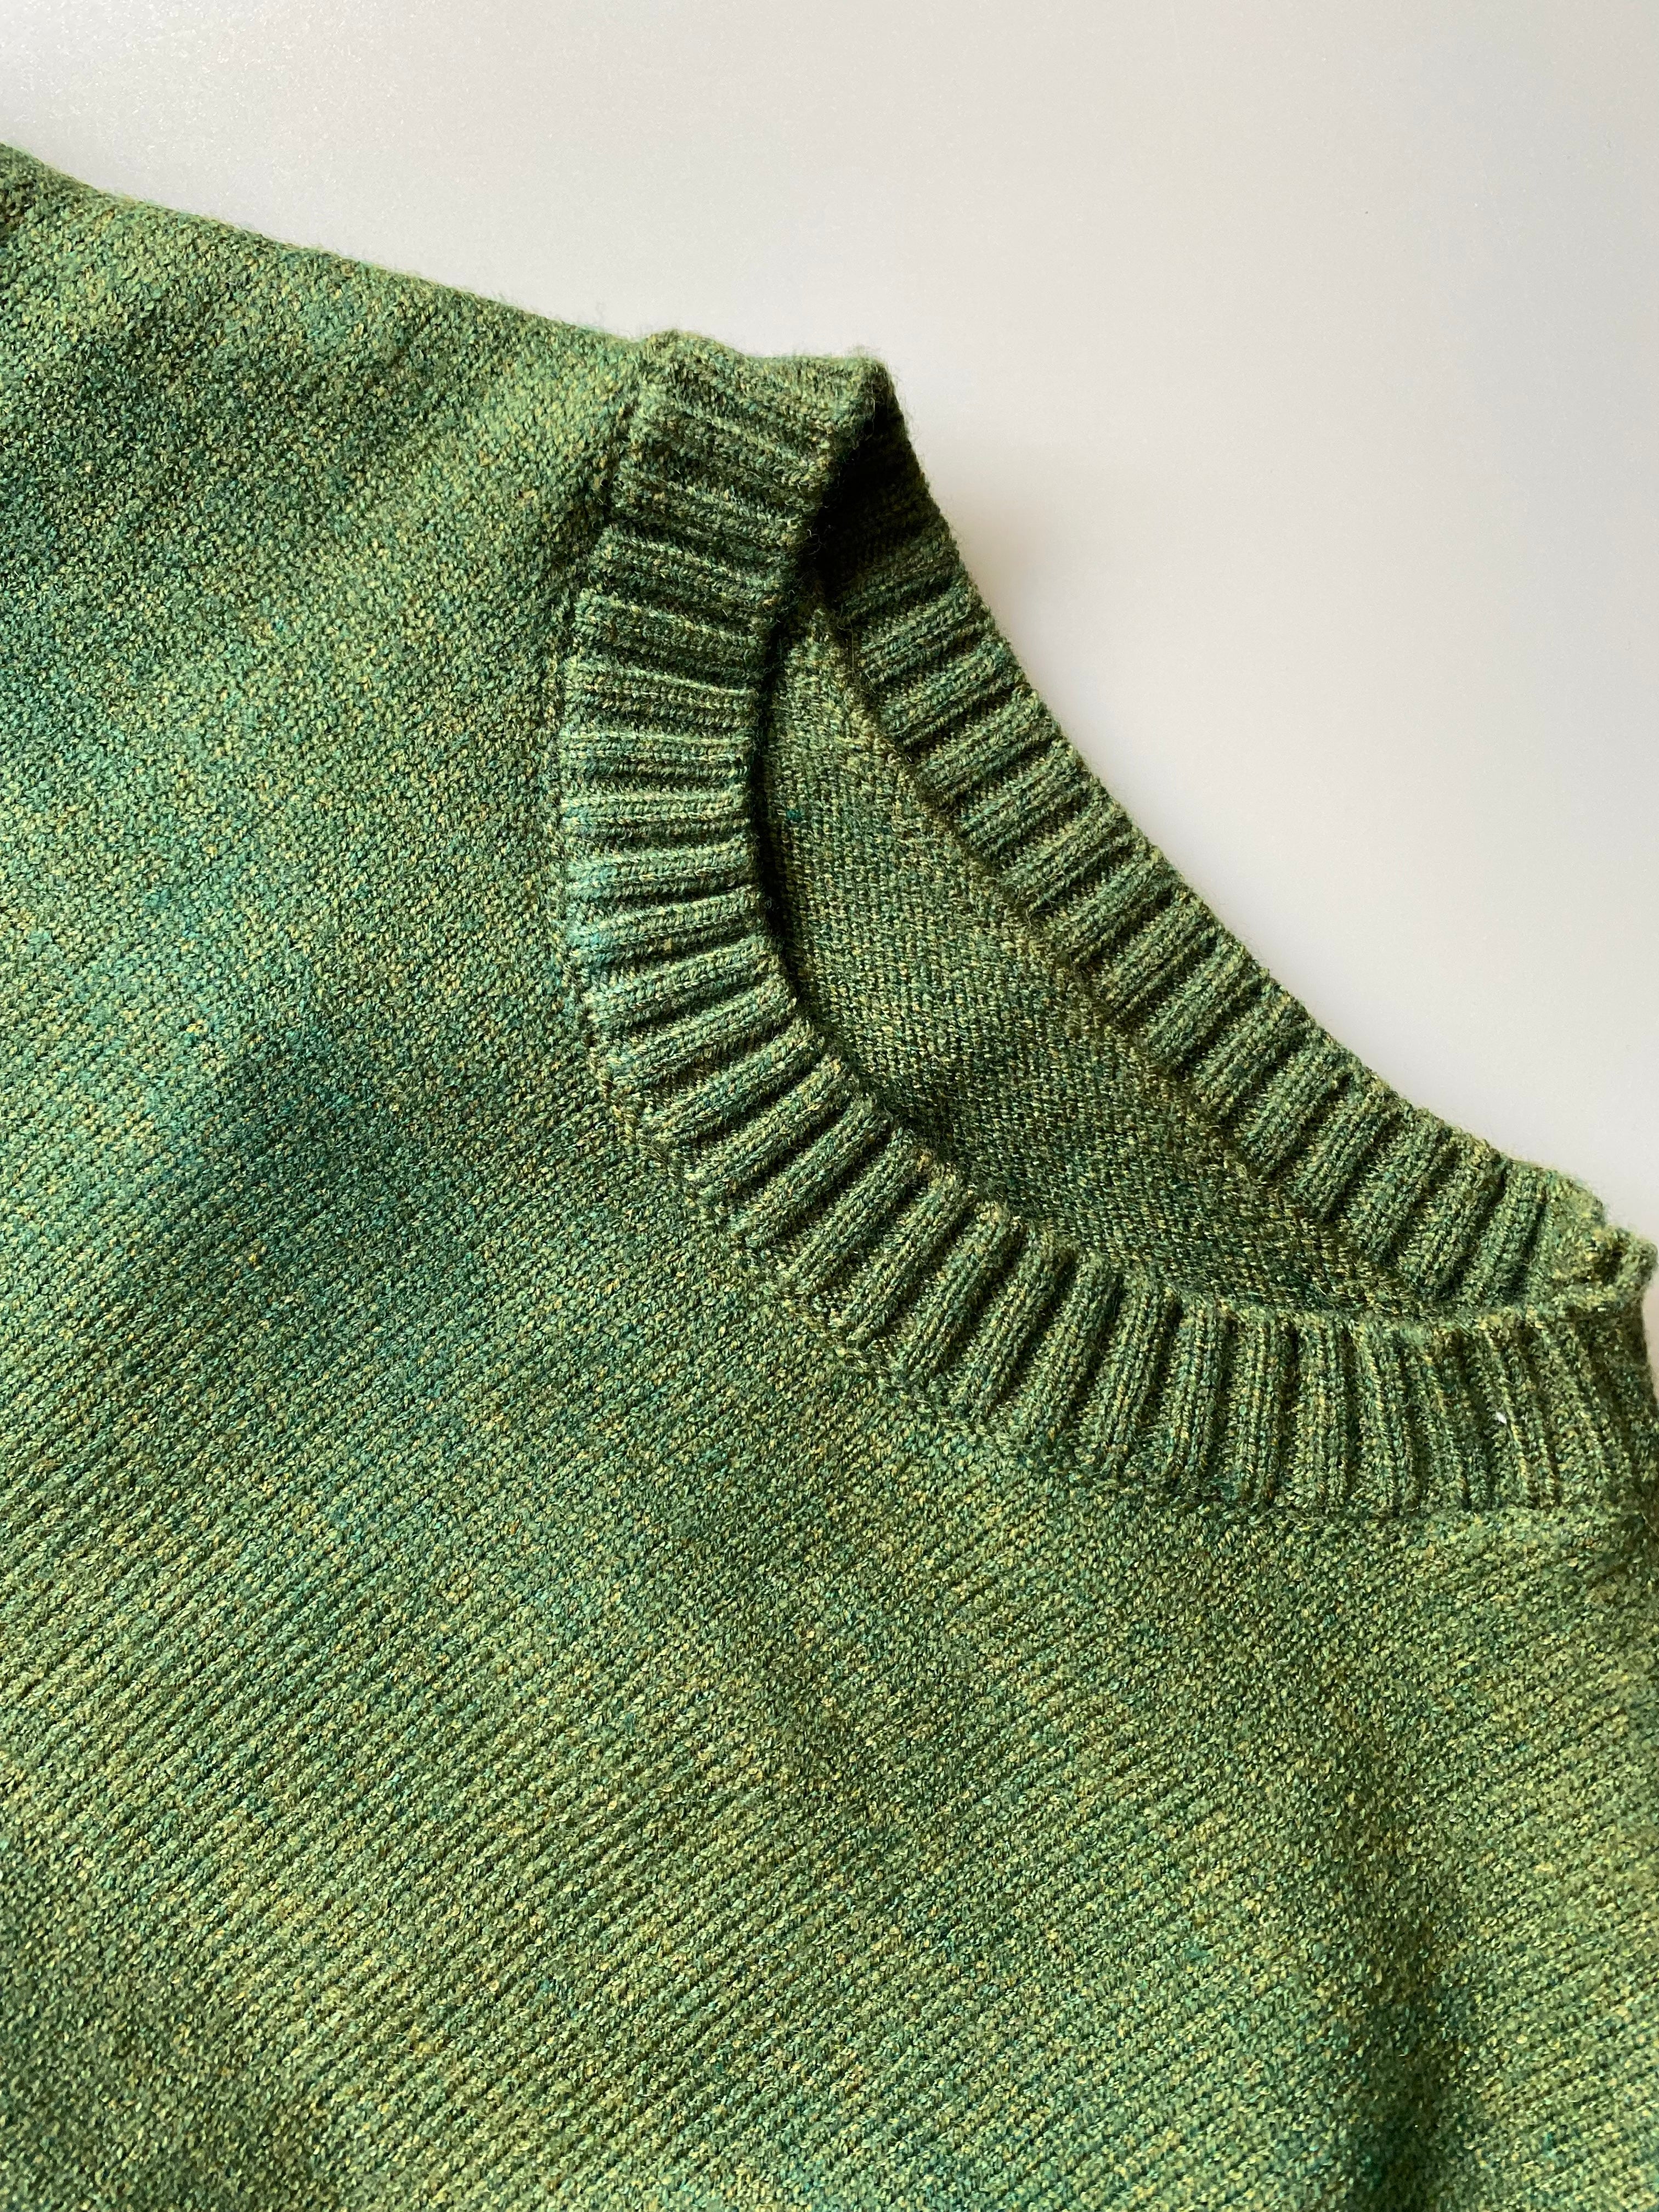 Green Melange Knitted Dress With Frill Edge Age 4